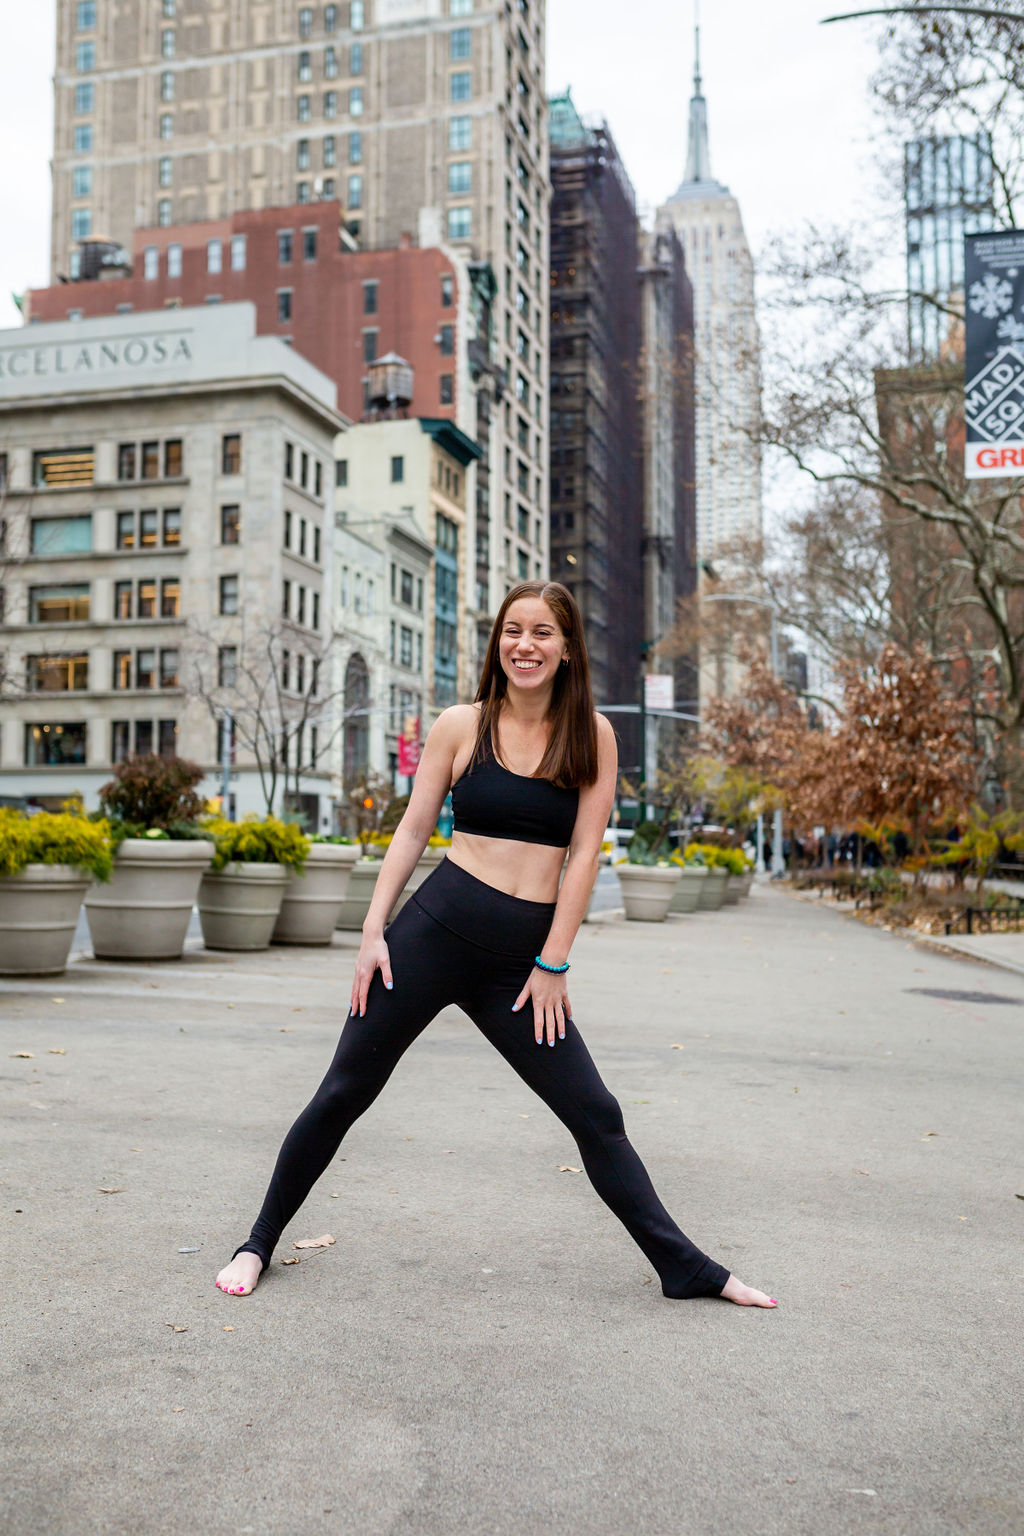 3 Yoga Myths To Stop Believing - Kayla in the City